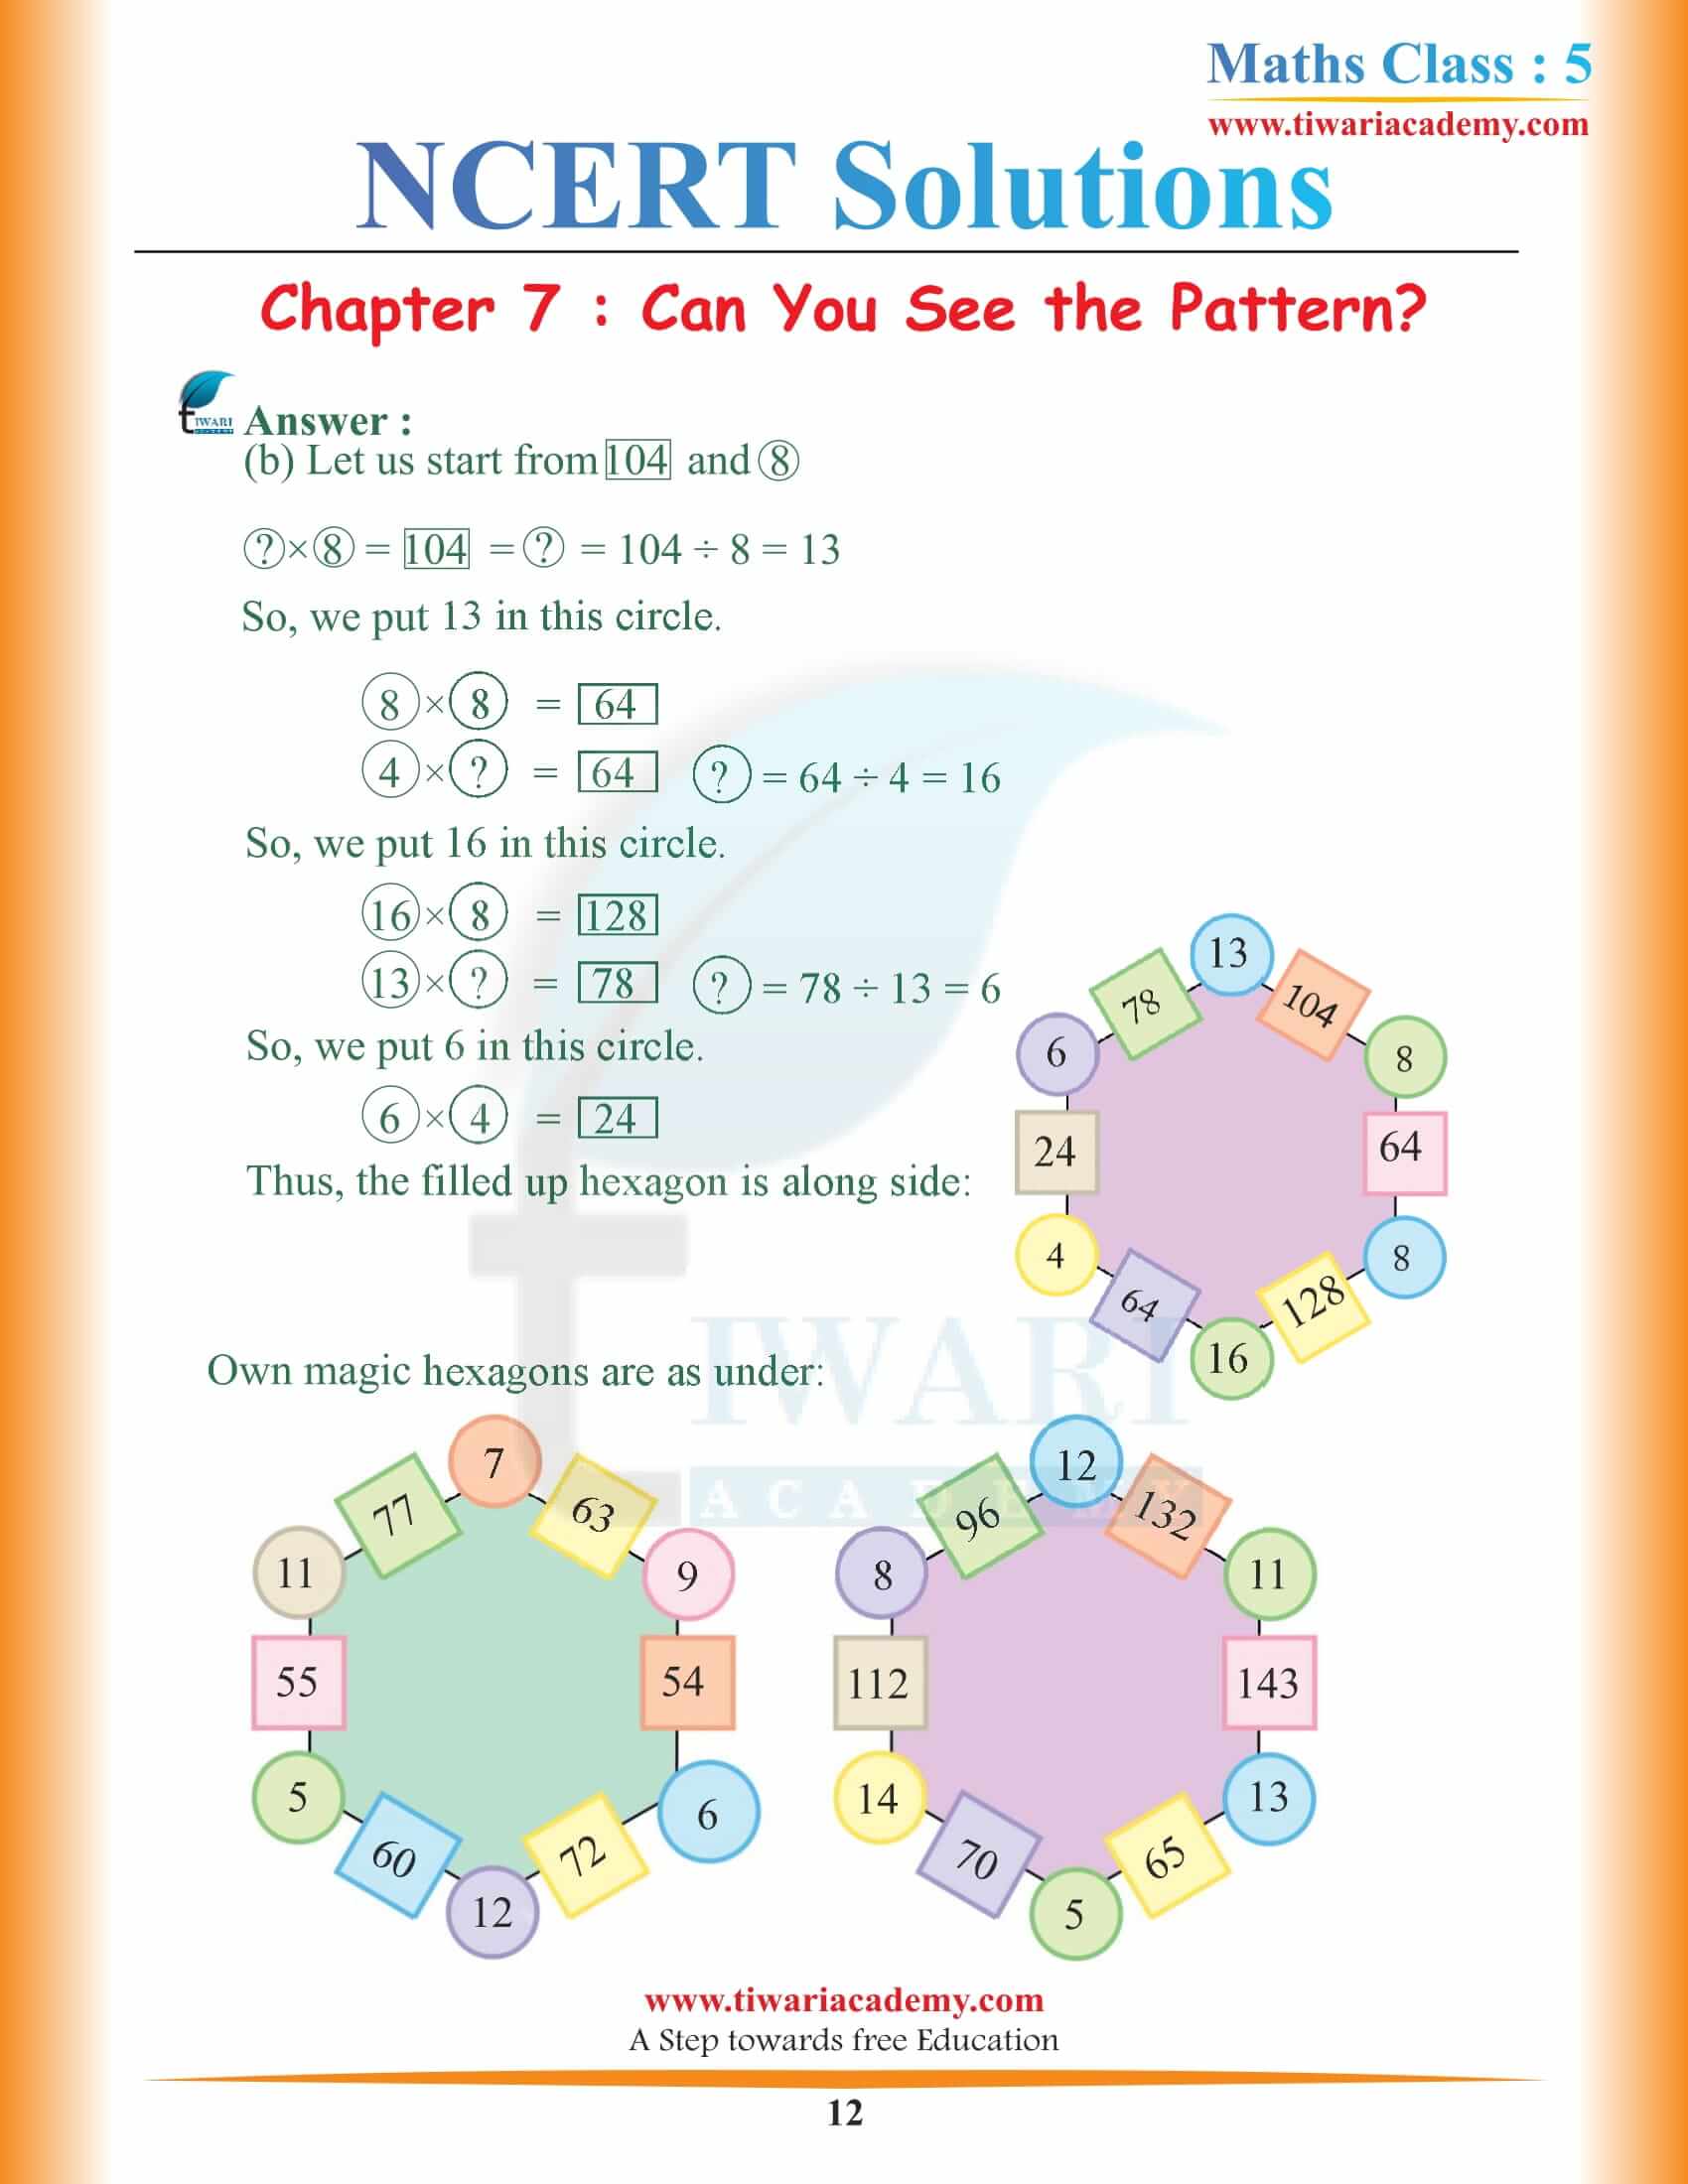 Class 5 Maths Chapter 7 NCERT Solutions in English